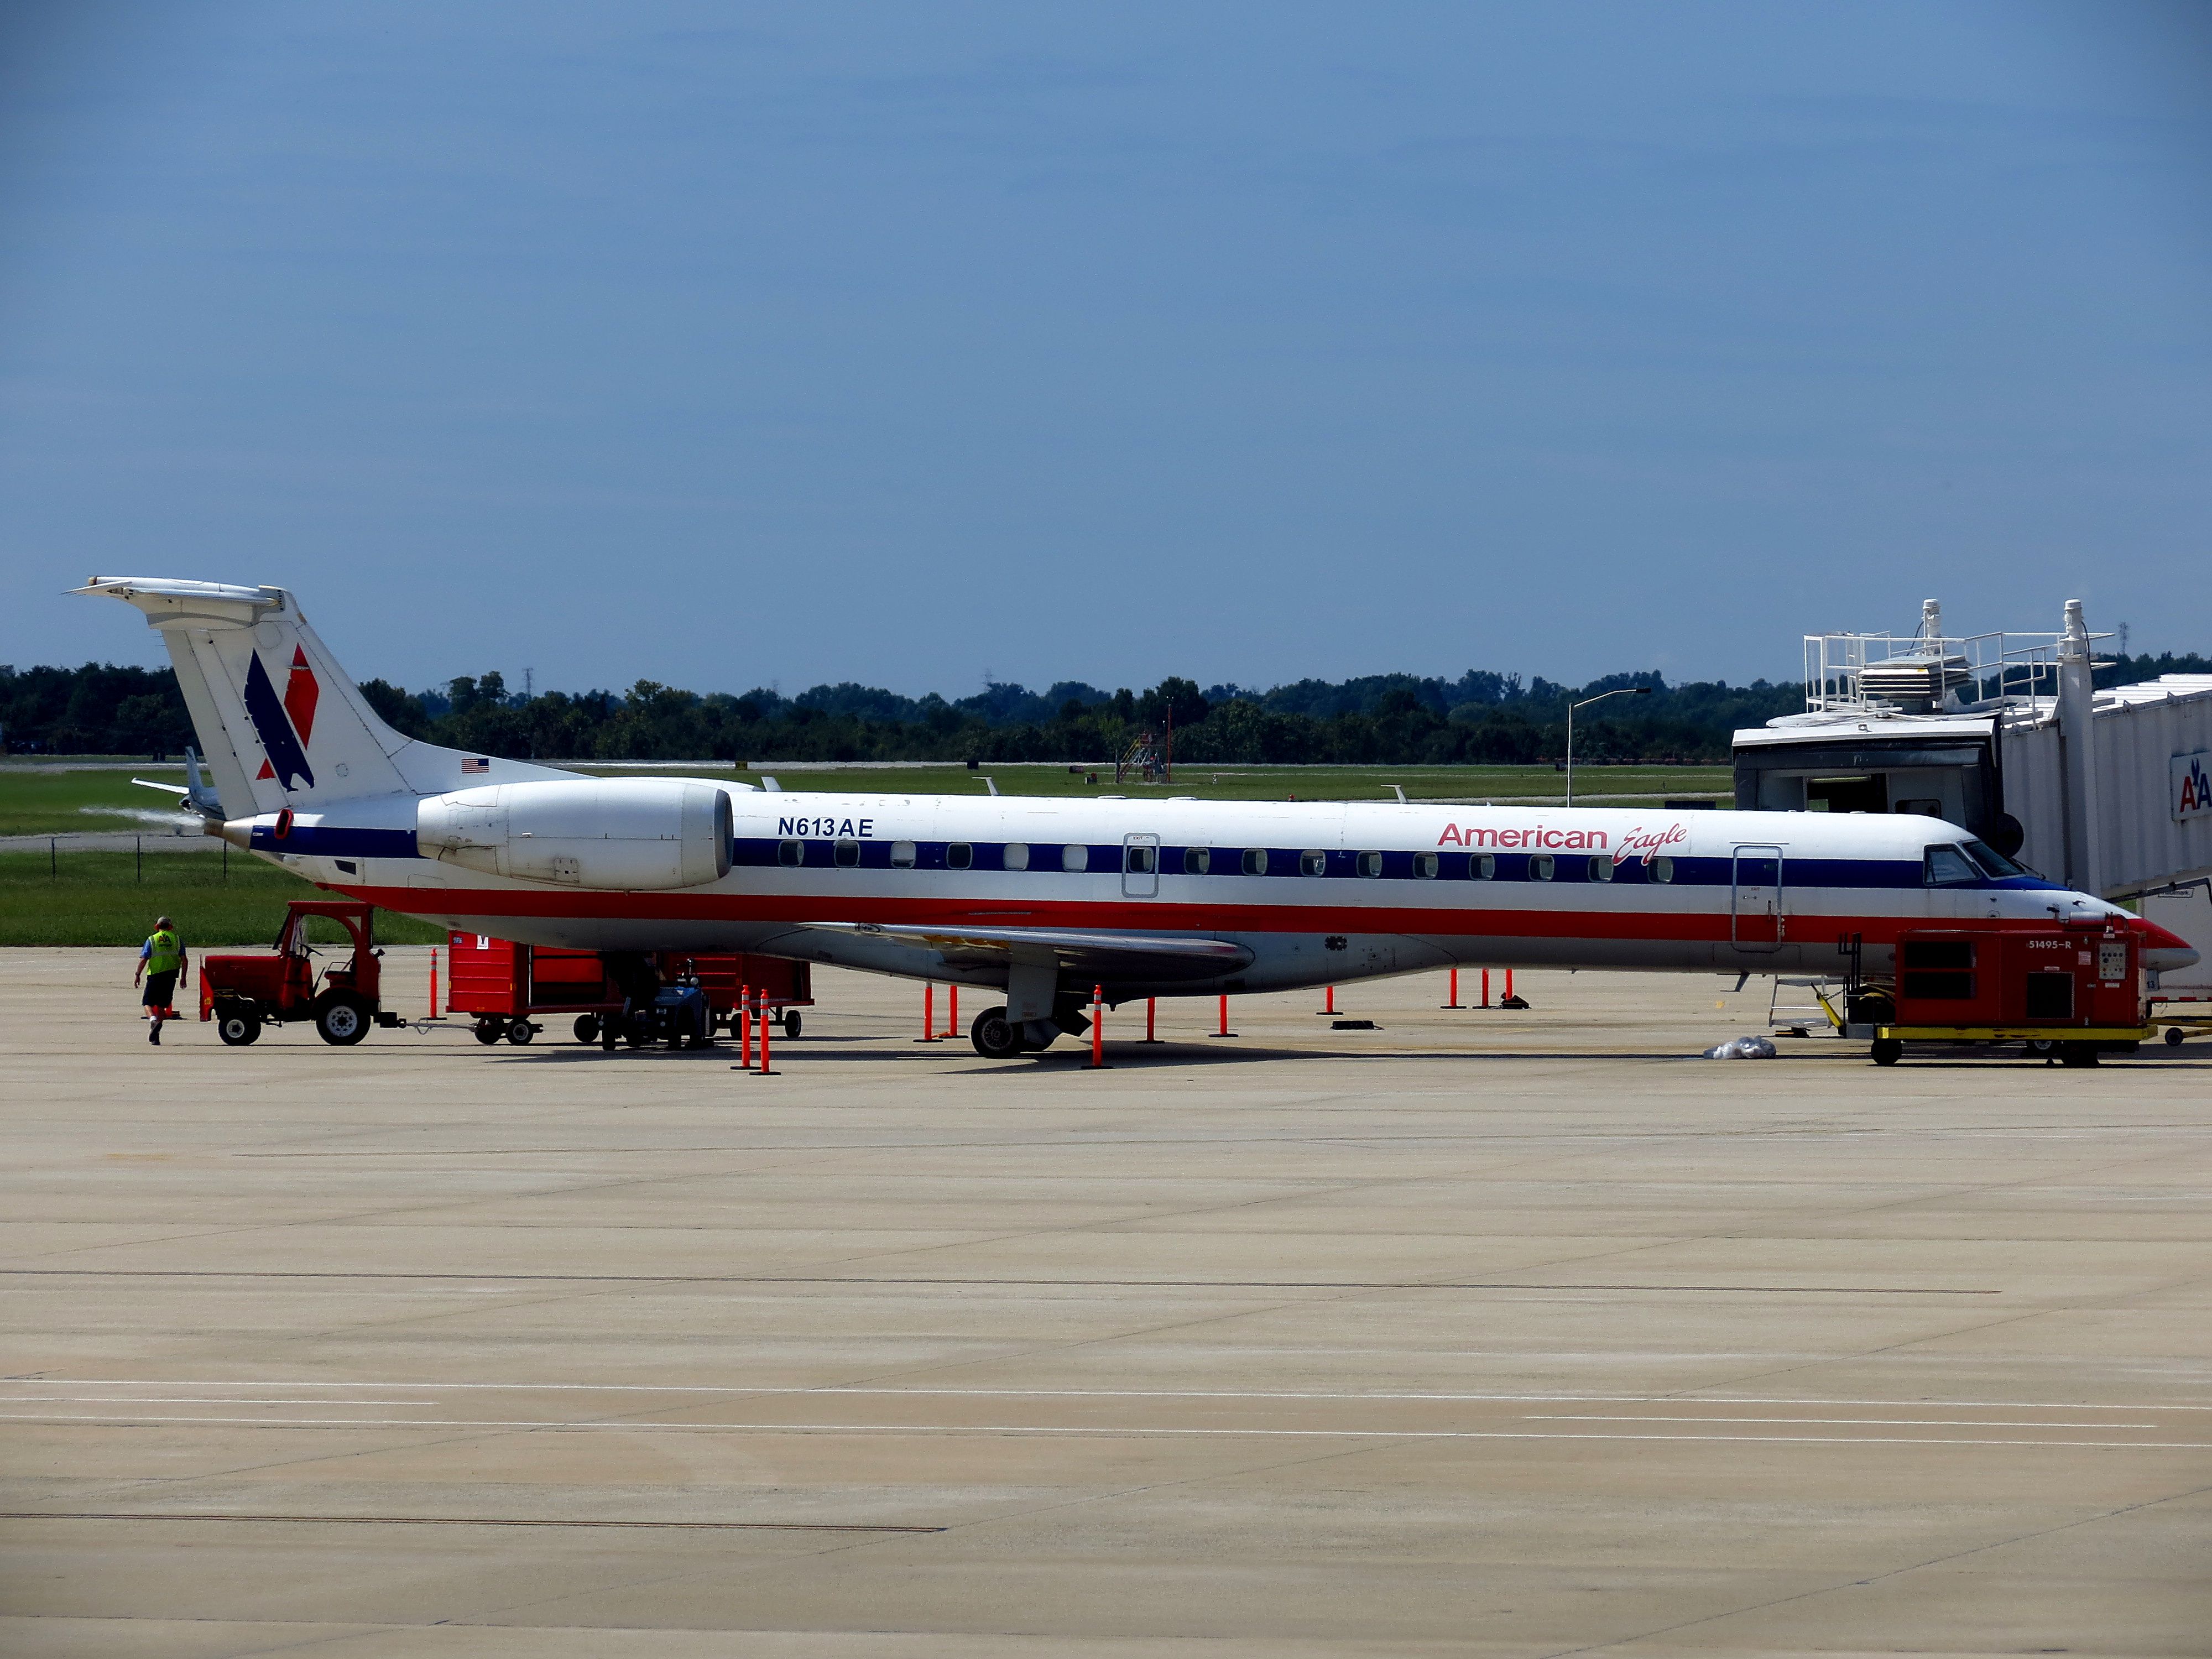 Wikipedia image of American Eagle Commercial aircraft on the tarmac